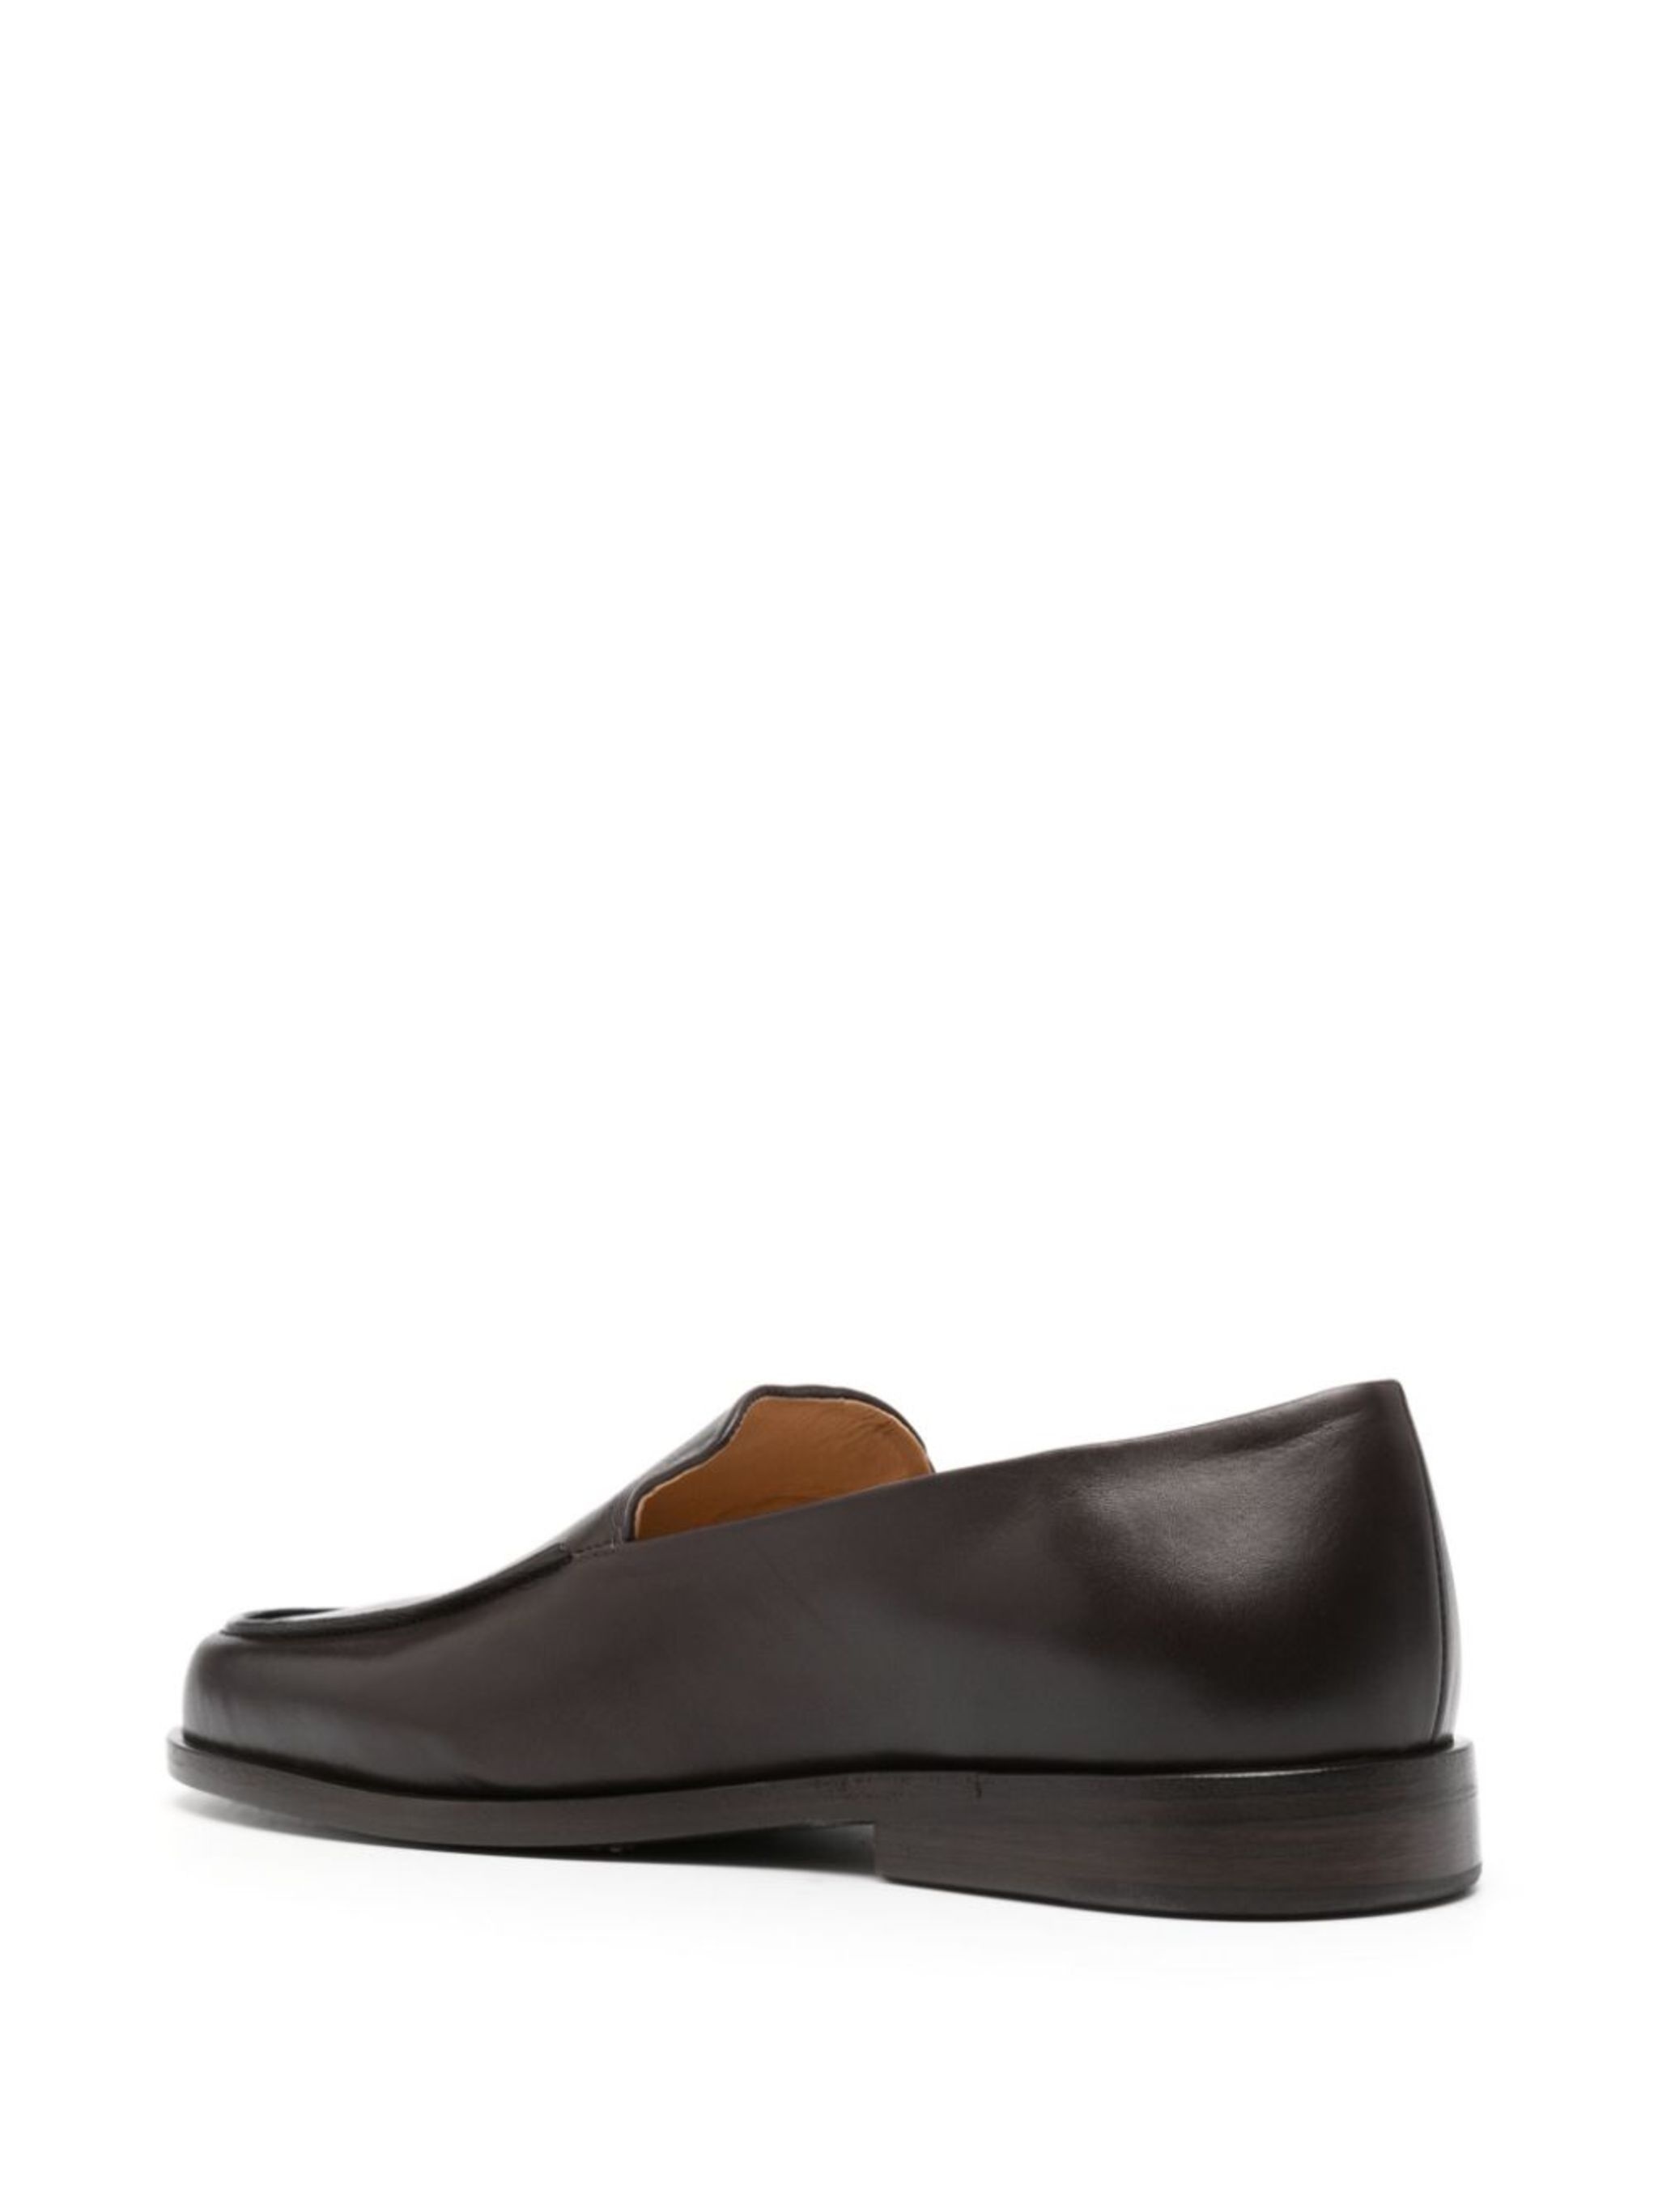 leather slip-on loafers - 3